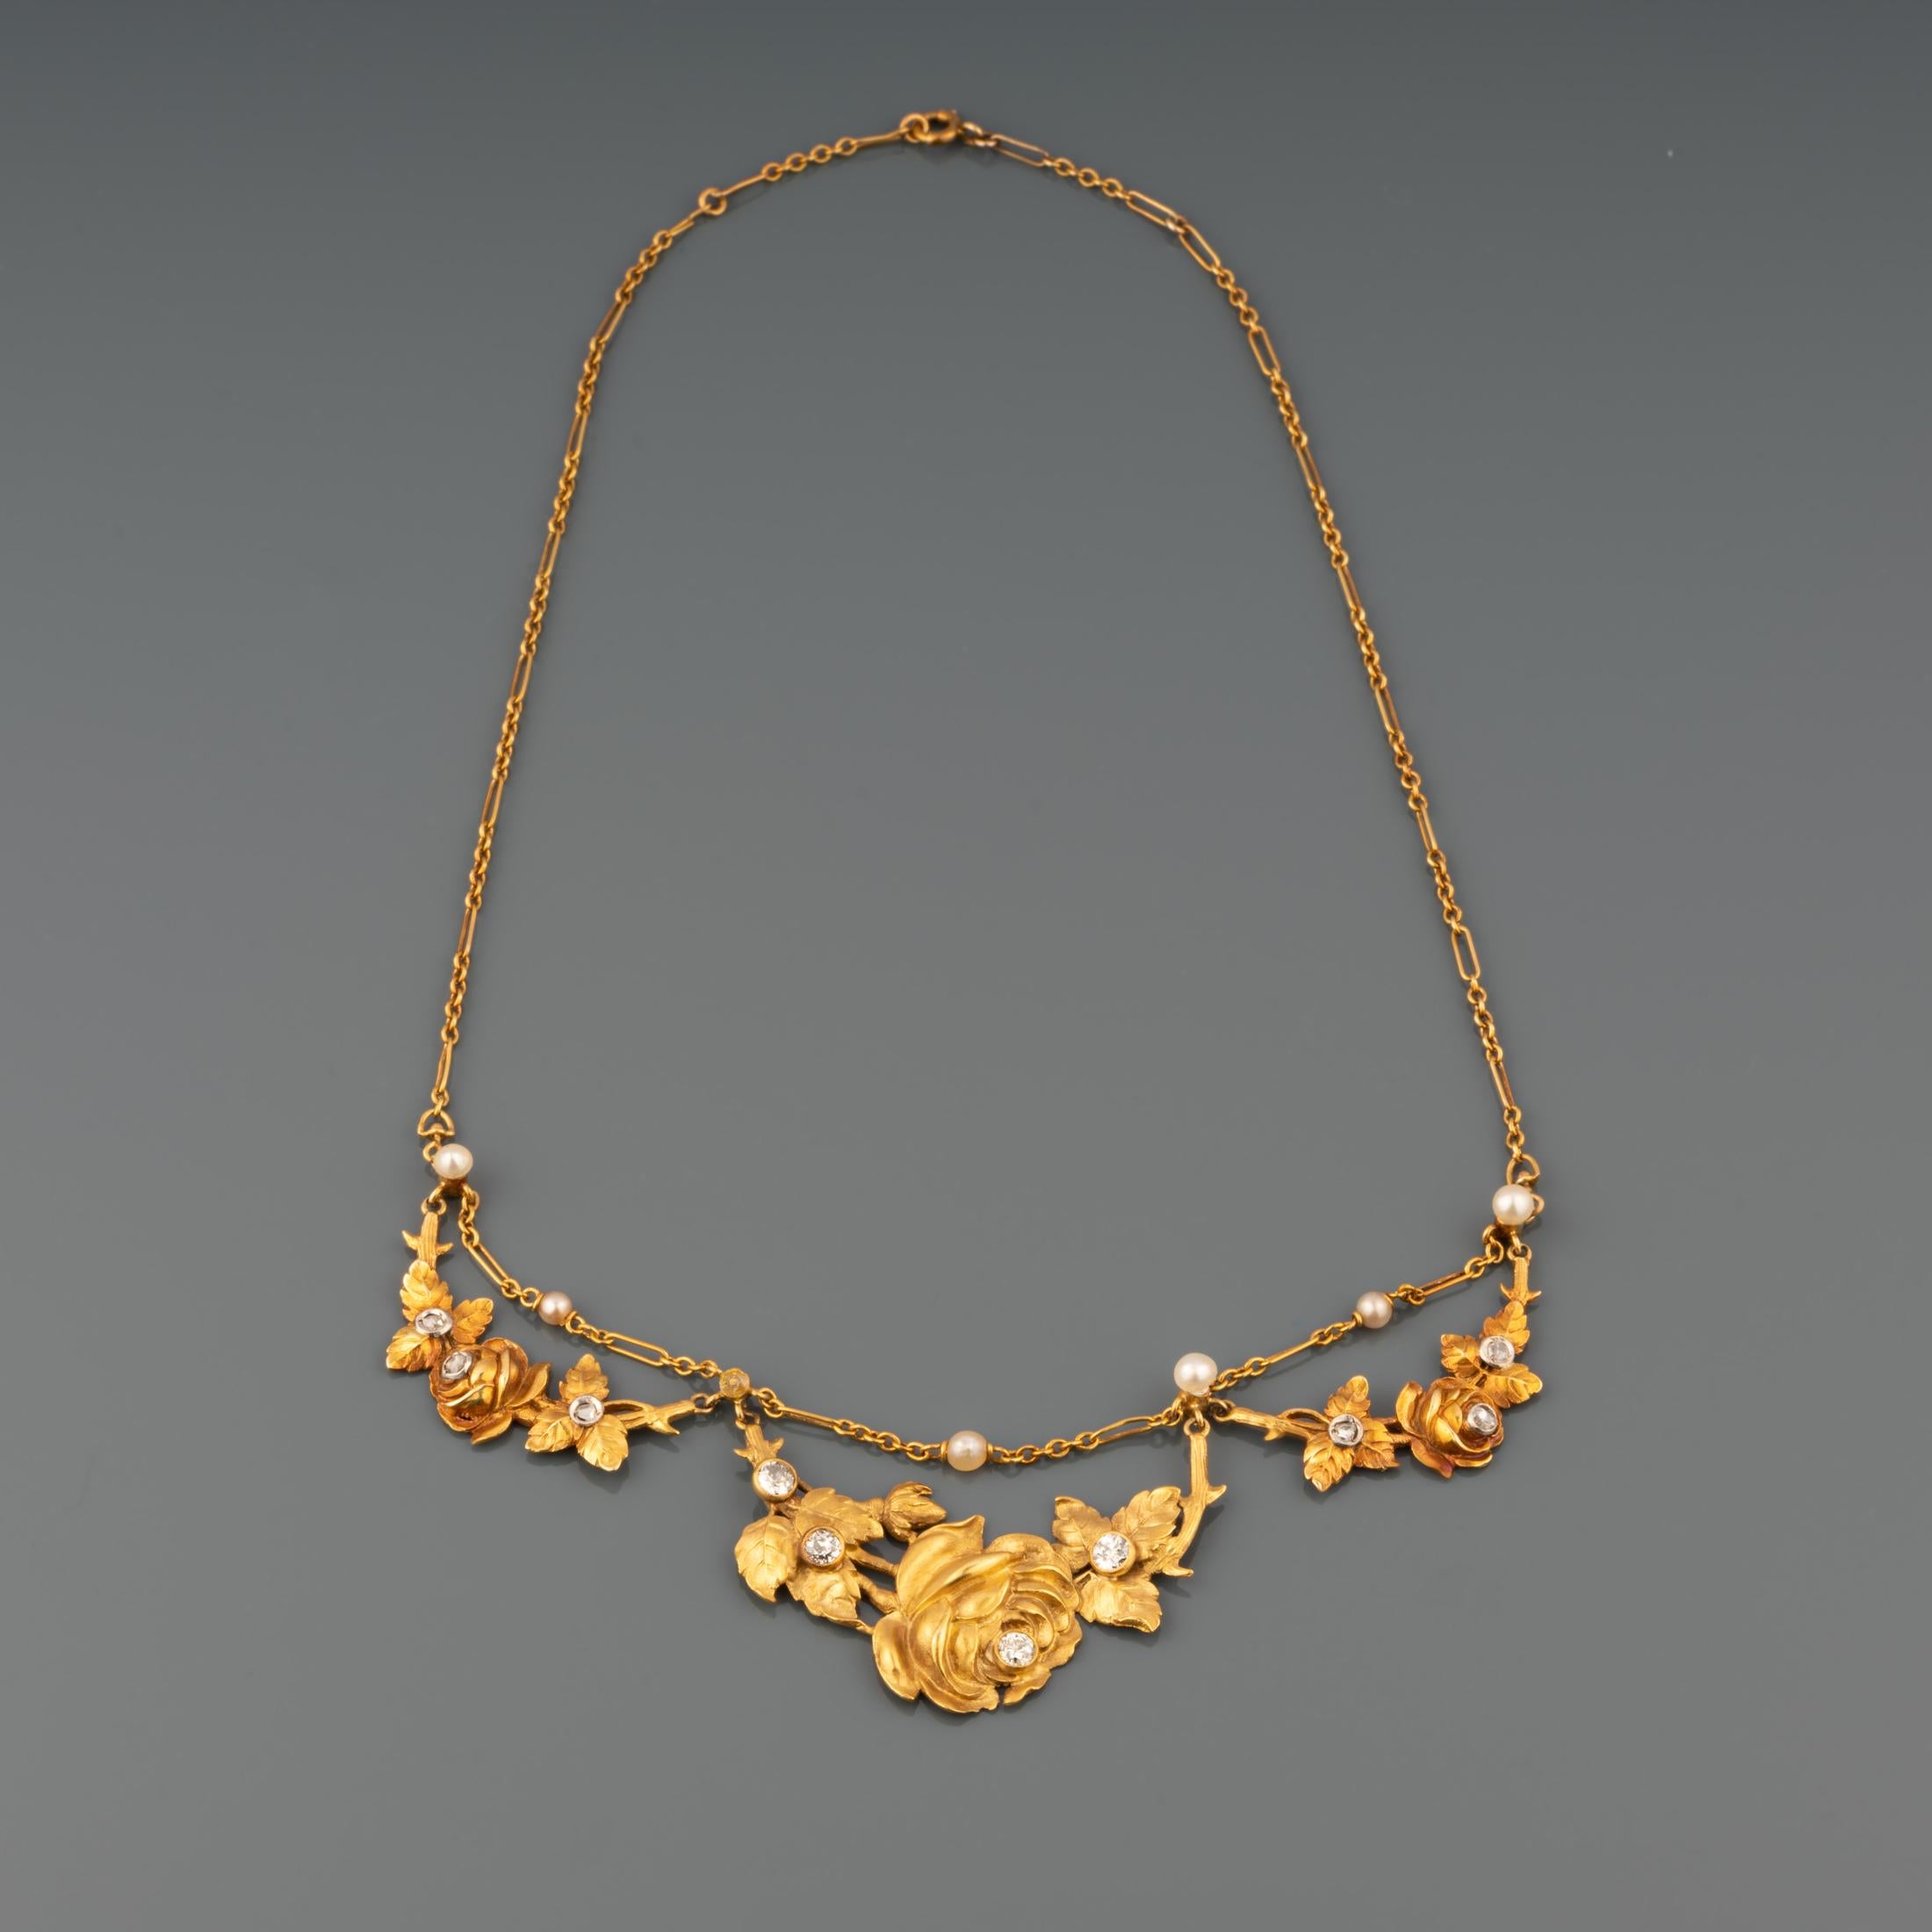 A very beautiful antique necklace, made in France circa 1890.Belle Epoque / Art Nouveau era.

Made in yellow gold 18k and set with diamonds and natural pearls.

The flowers part measures 13cm. The length of necklace is 42 cm.

Weight: 18.90 grams.

